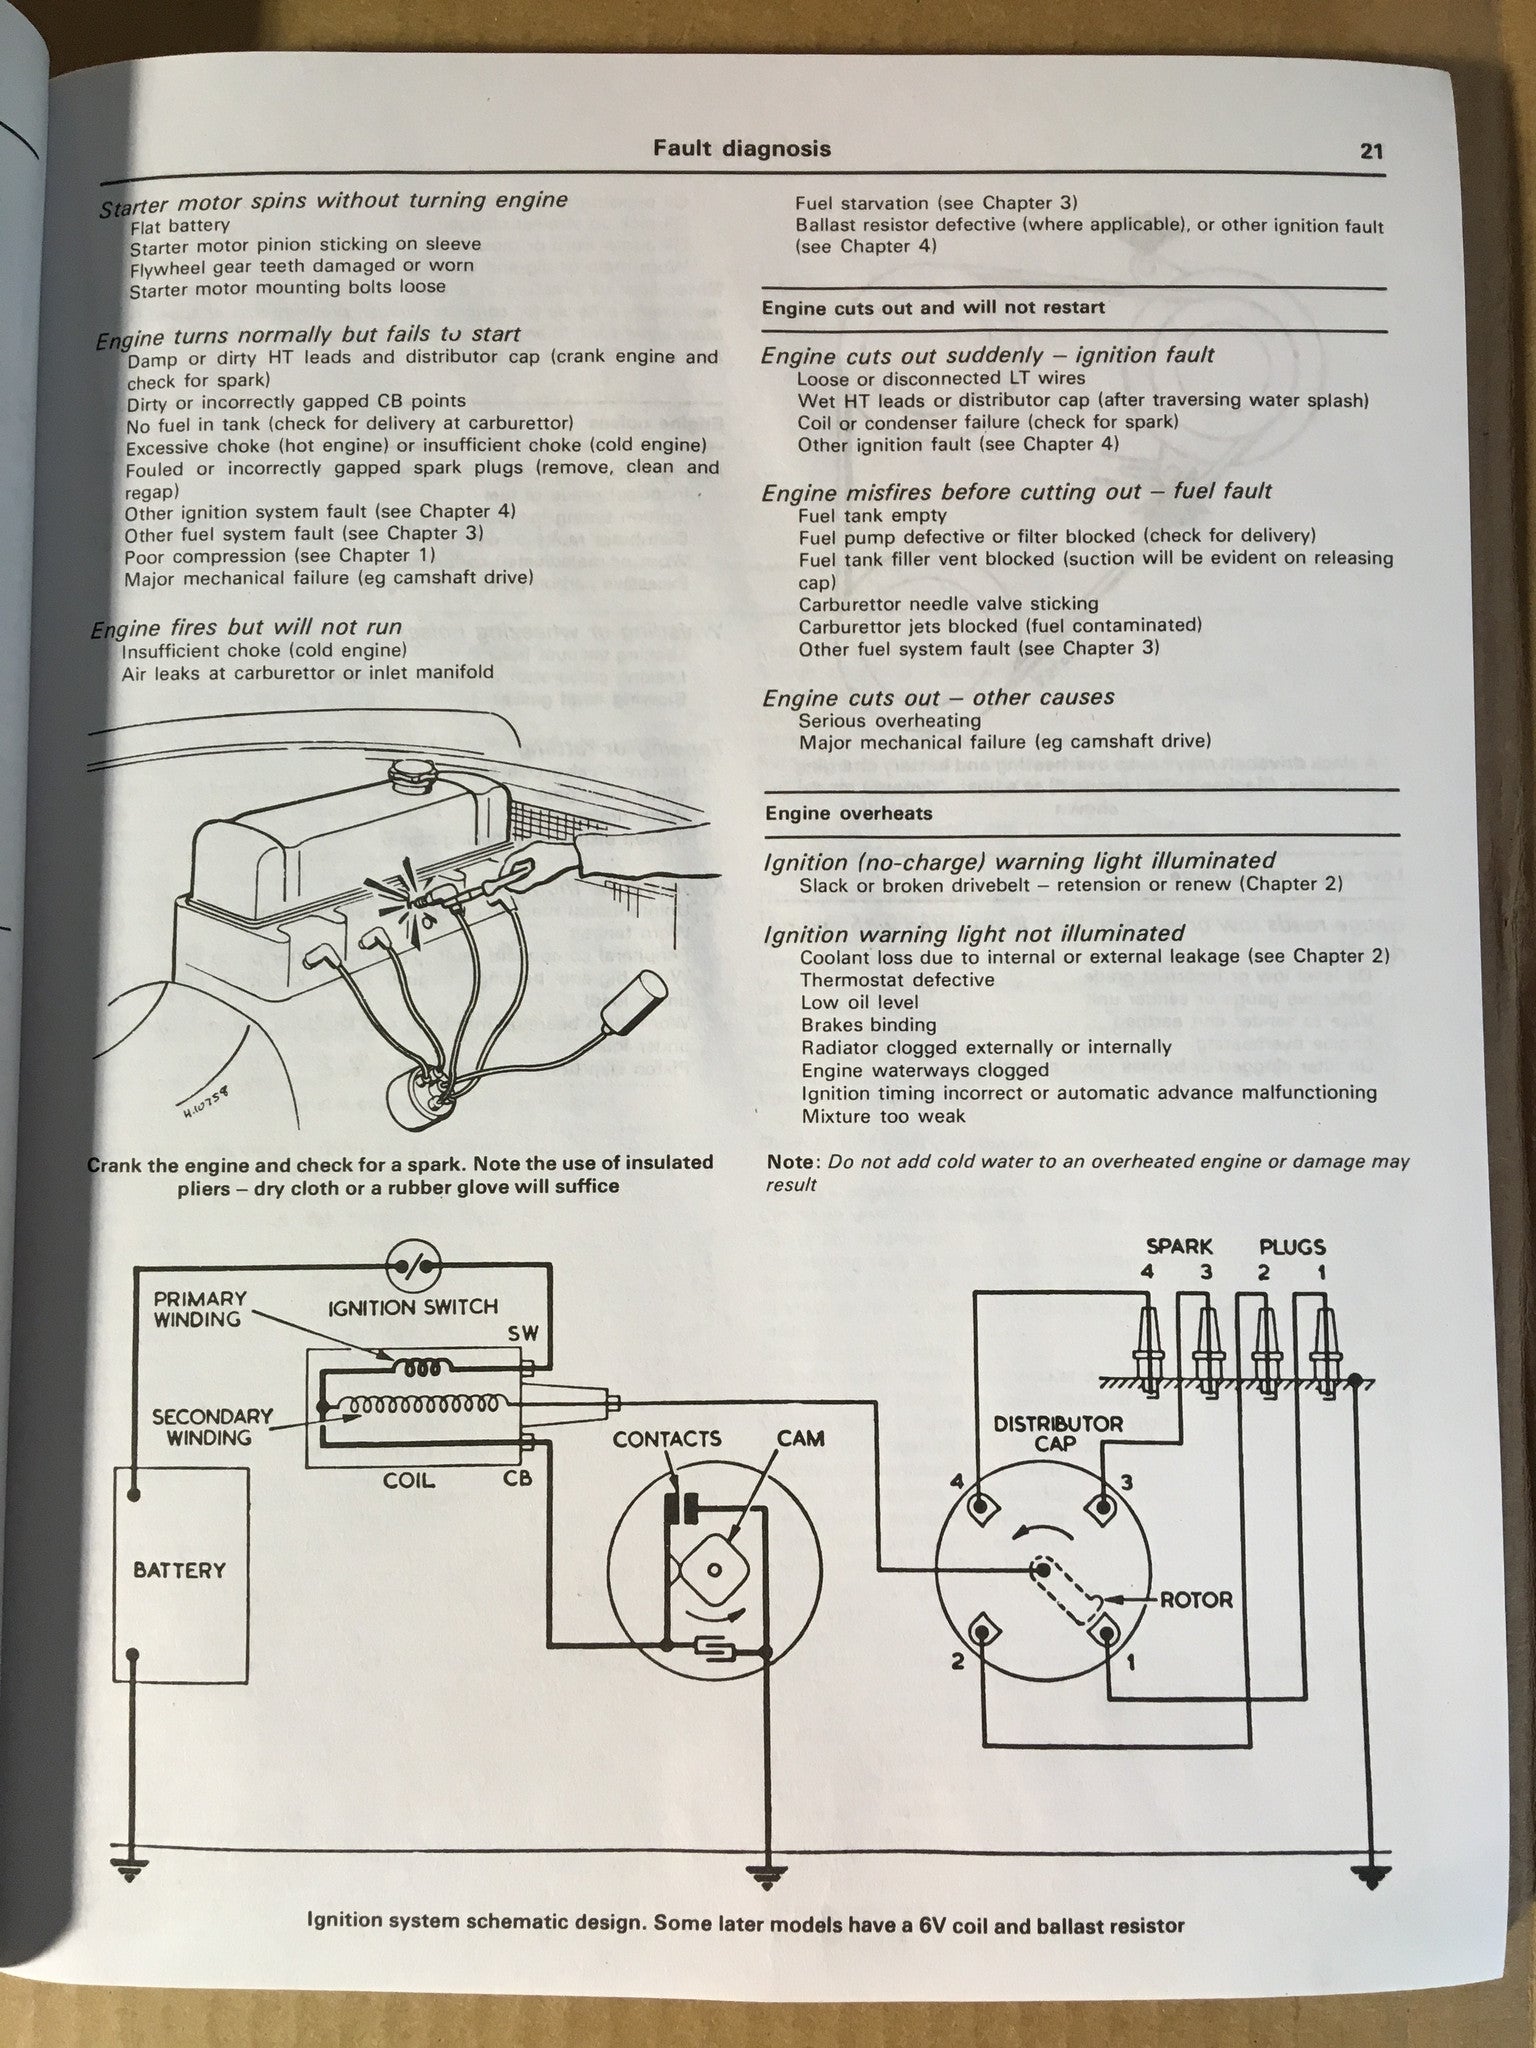 Simple Guide to the Oil Breather System - Haynes Manuals